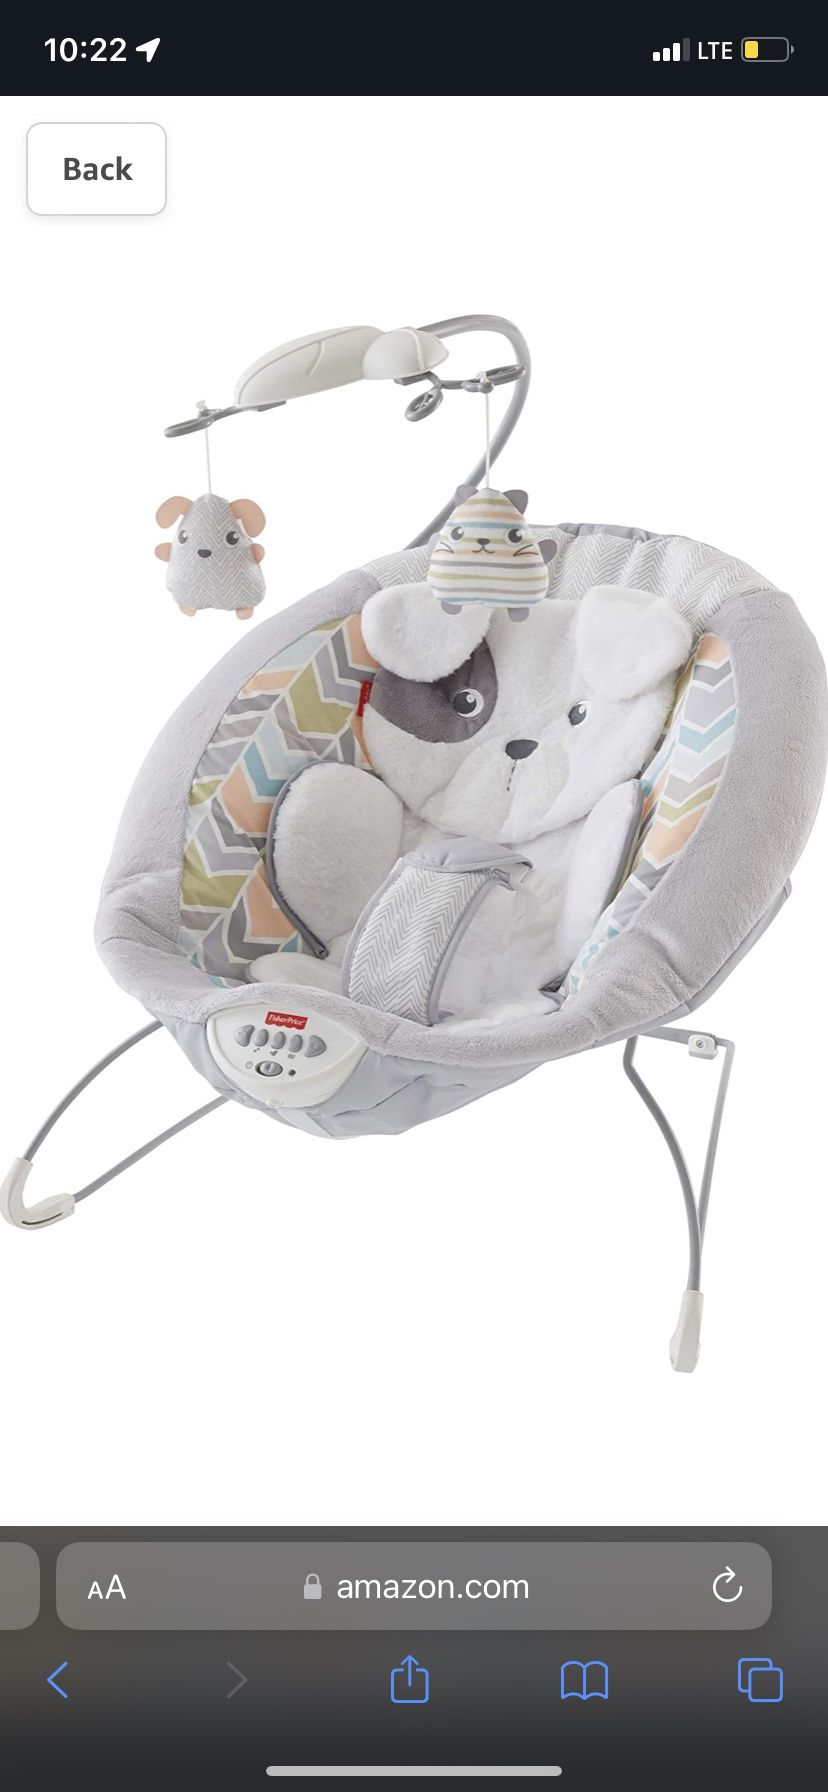 Fisher-Price Sweet Snugapuppy Deluxe Bouncer, Portable Bouncing Baby Seat with Overhead Mobile, Music, and Calming Vibrations